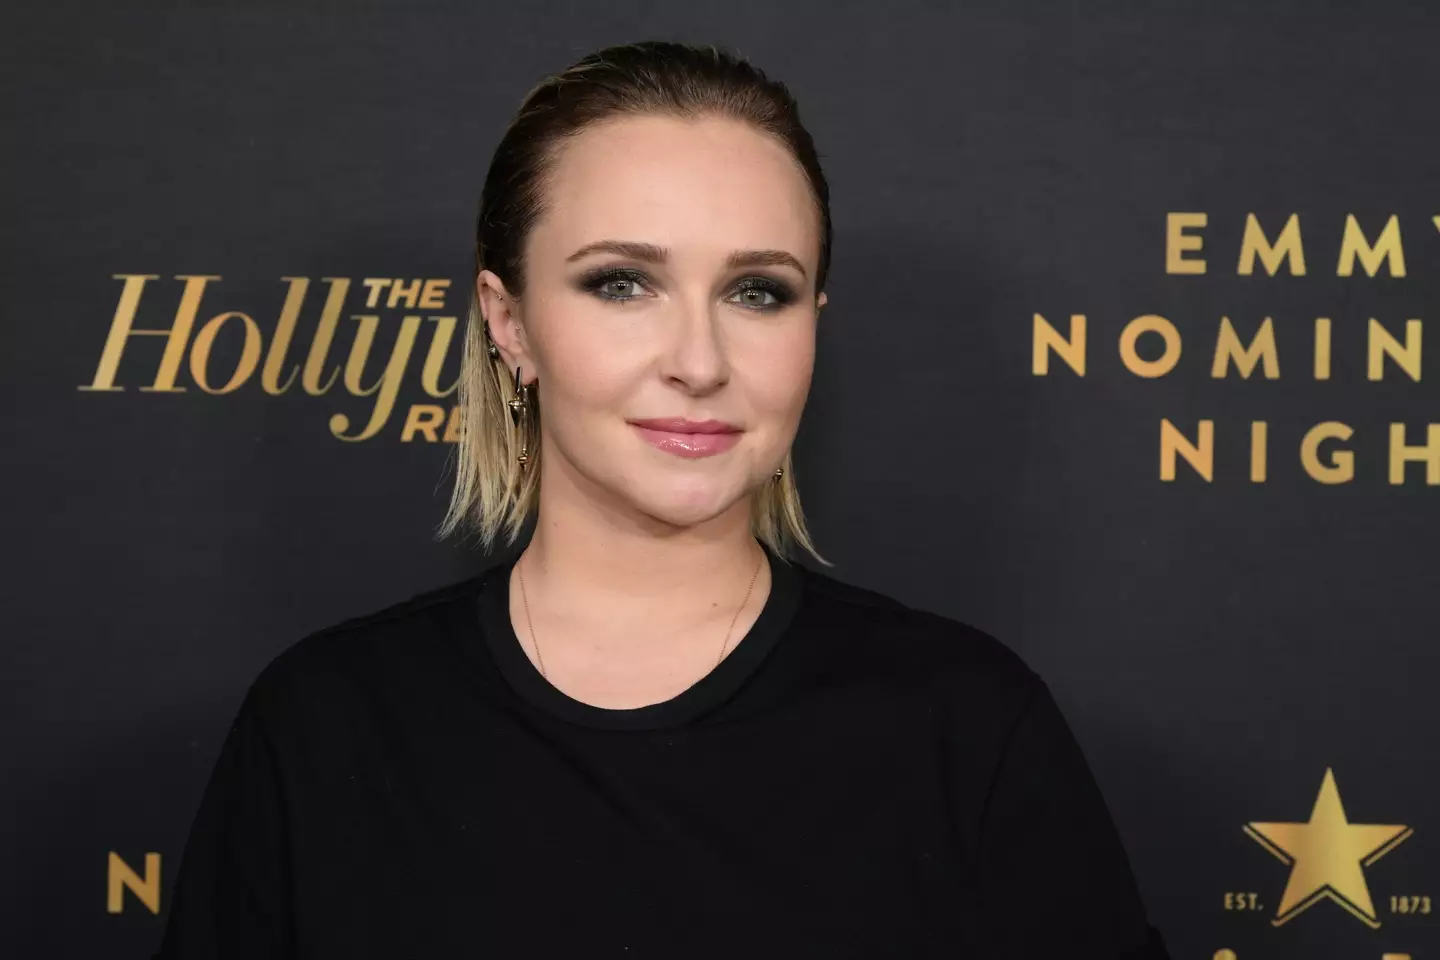 Panettiere has also said she doesn’t believe this is simply a cute phase but rather will spell bigger issues in the future.(Michael Kovac/The Hollywood Reporter via Getty Images)